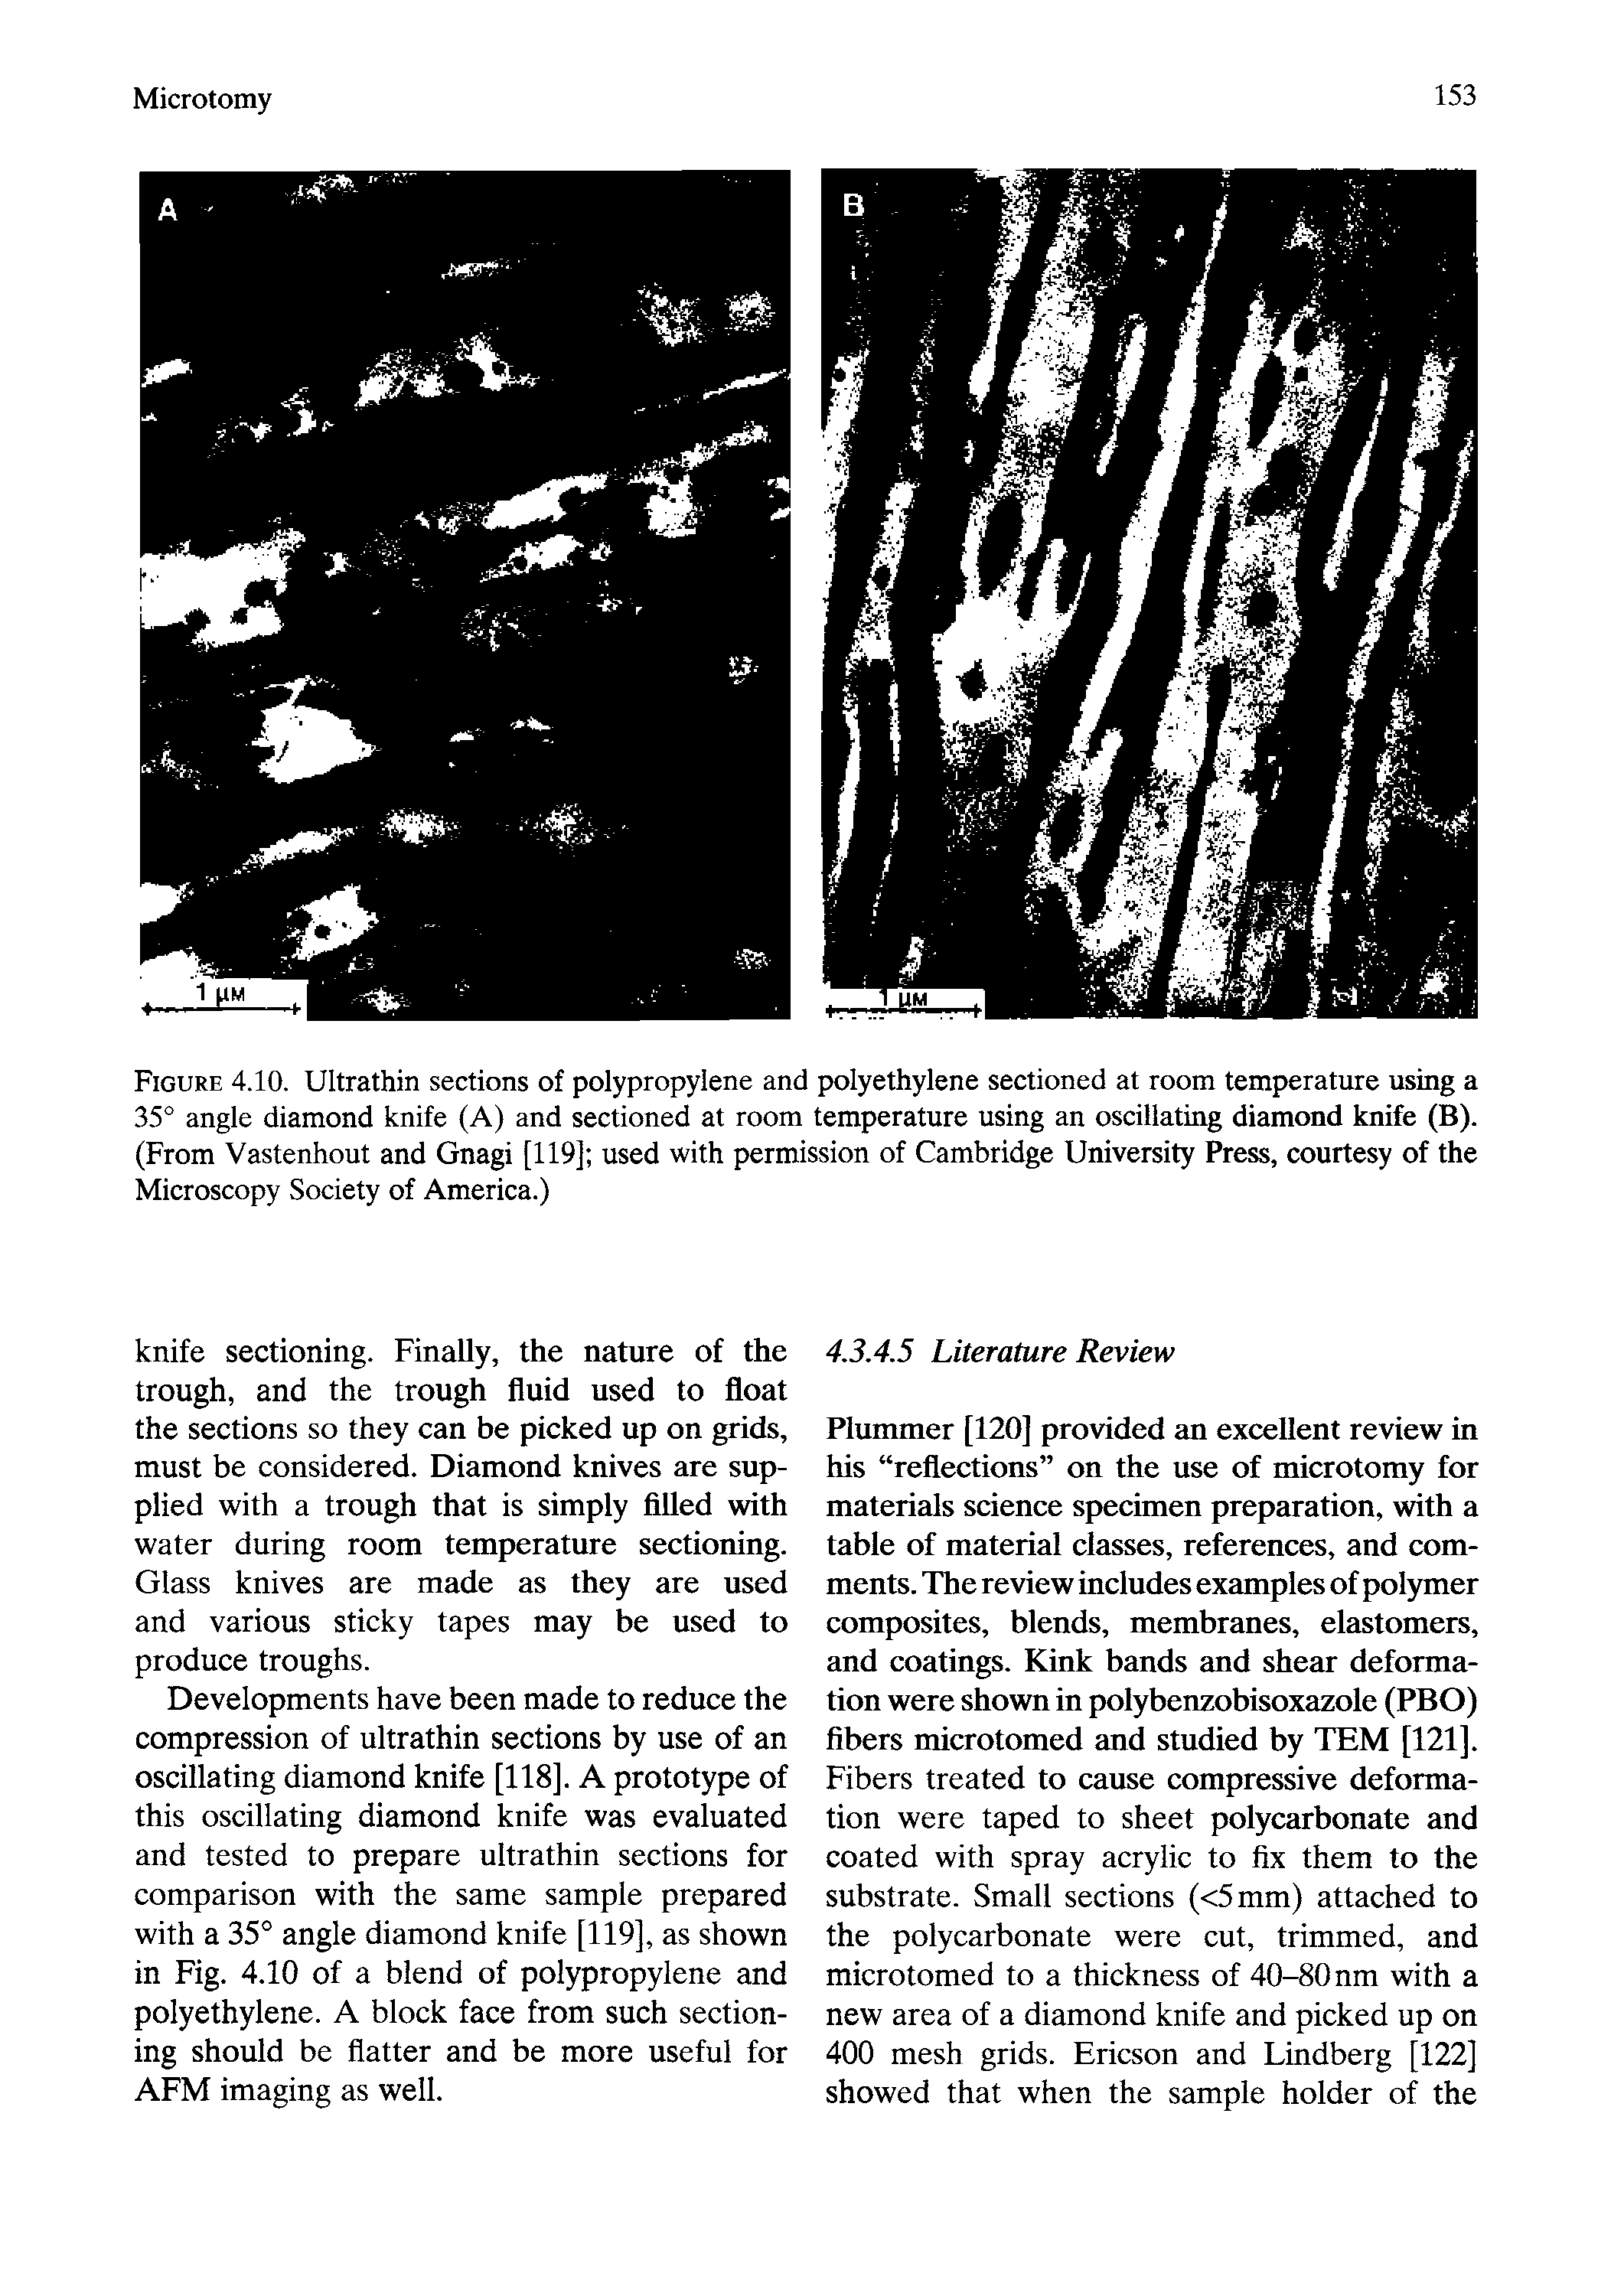 Figure 4.10. Ultrathin sections of polypropylene and polyethylene sectioned at room temperature using a 35° angle diamond knife (A) and sectioned at room temperature using an oscillating diamond knife (B). (From Vastenhout and Gnagi [119] used with permission of Cambridge University Press, courtesy of the Microscopy Society of America.)...